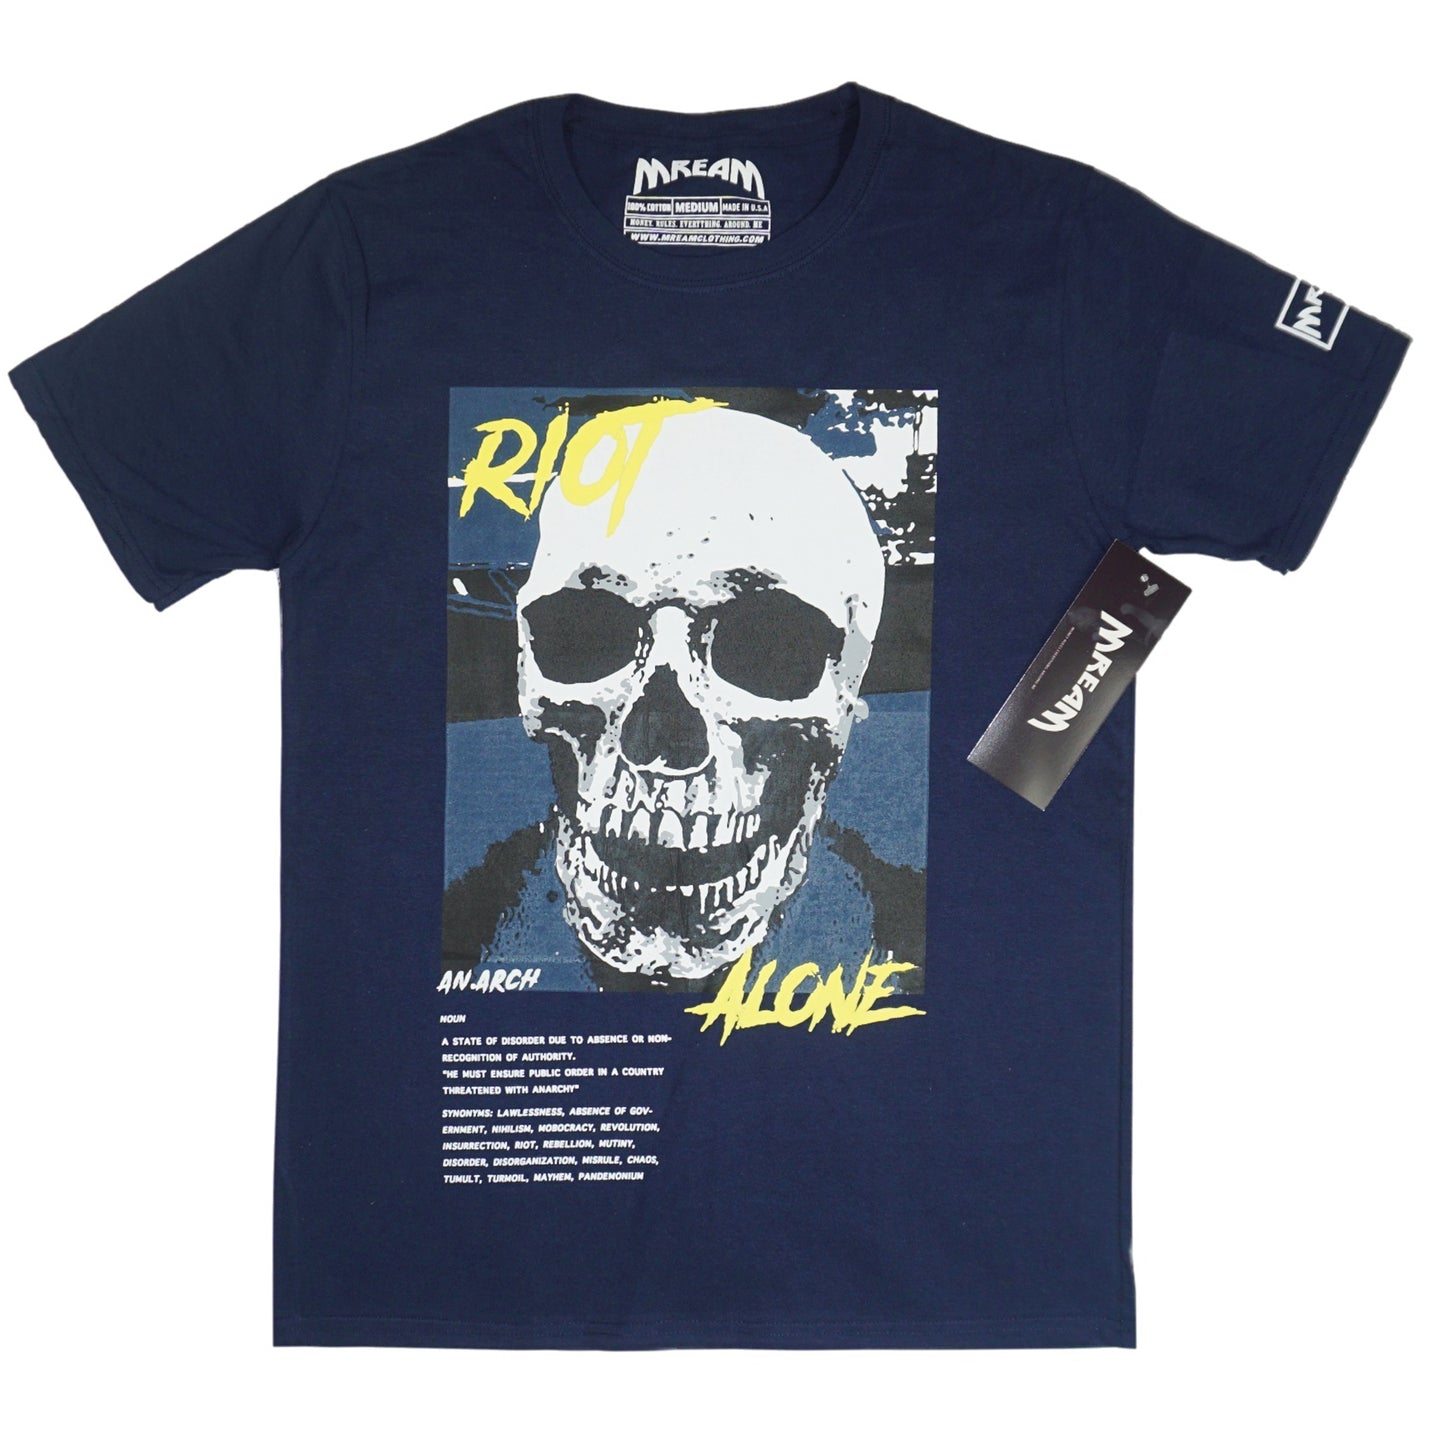 Riot Alone Yllw/Navy Tee (Navy) /D14